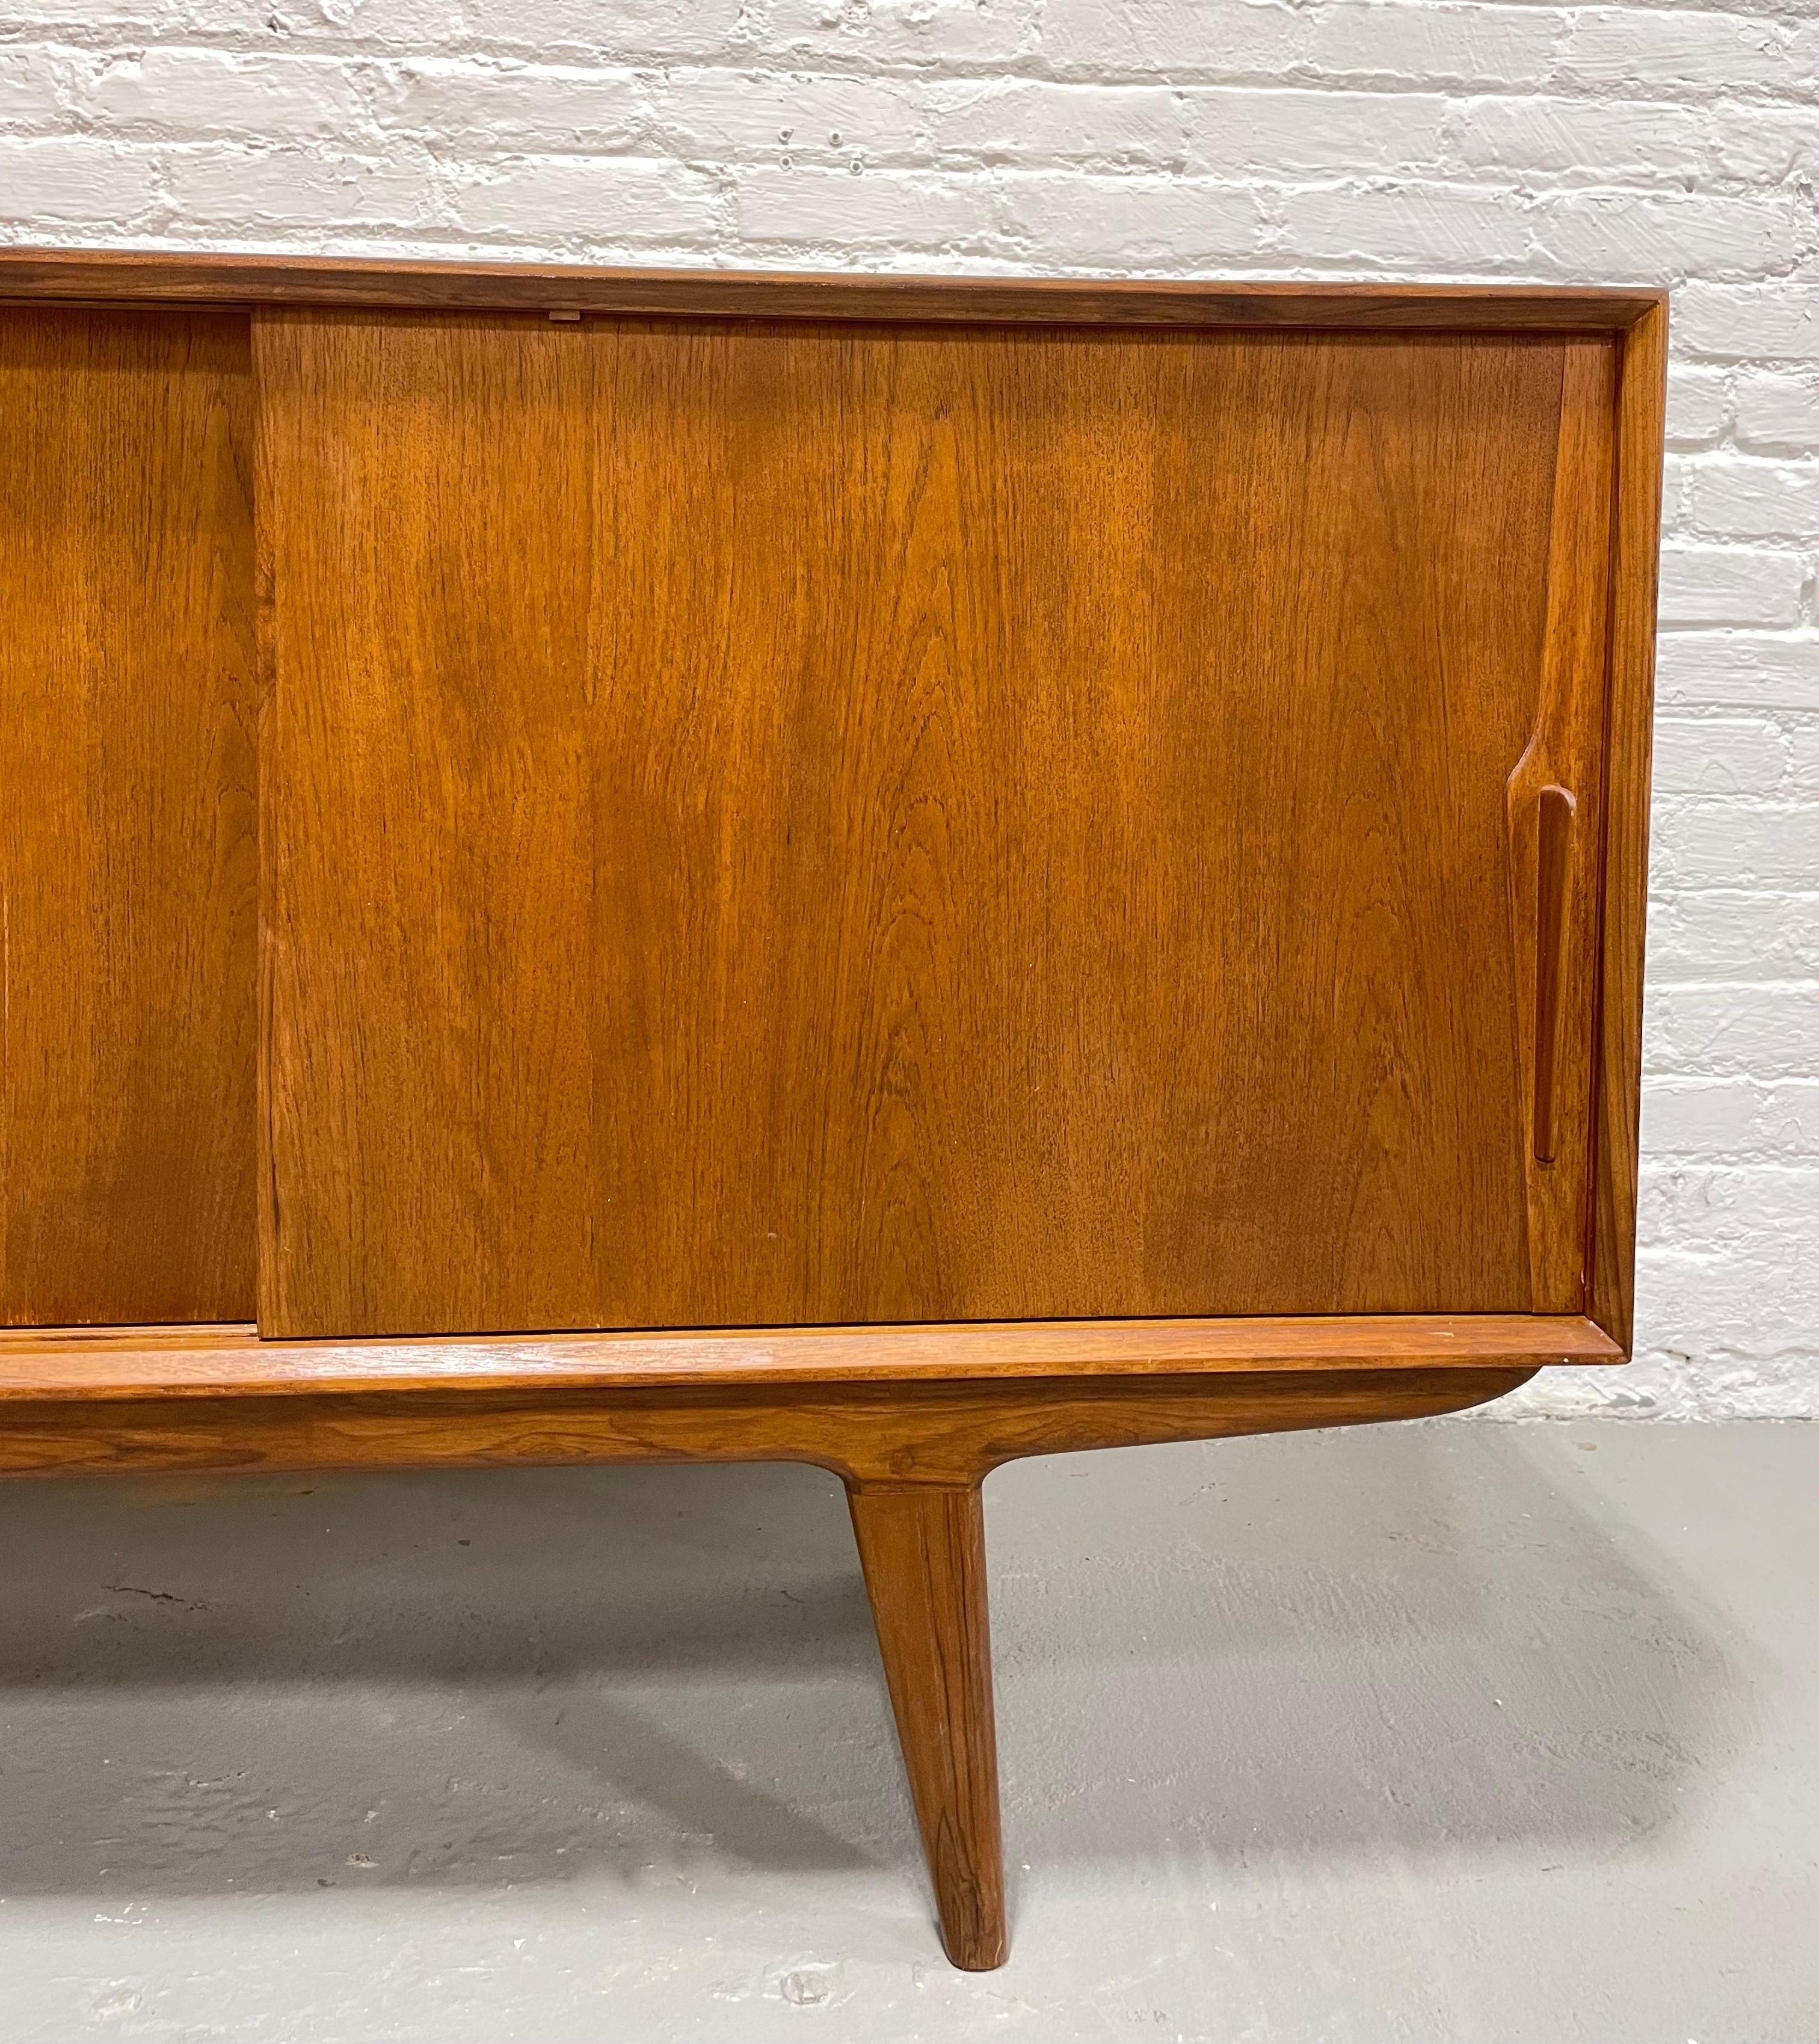  Handsome Mid Century MODERN styled SIDEBOARD / CREDENZA media stand 6